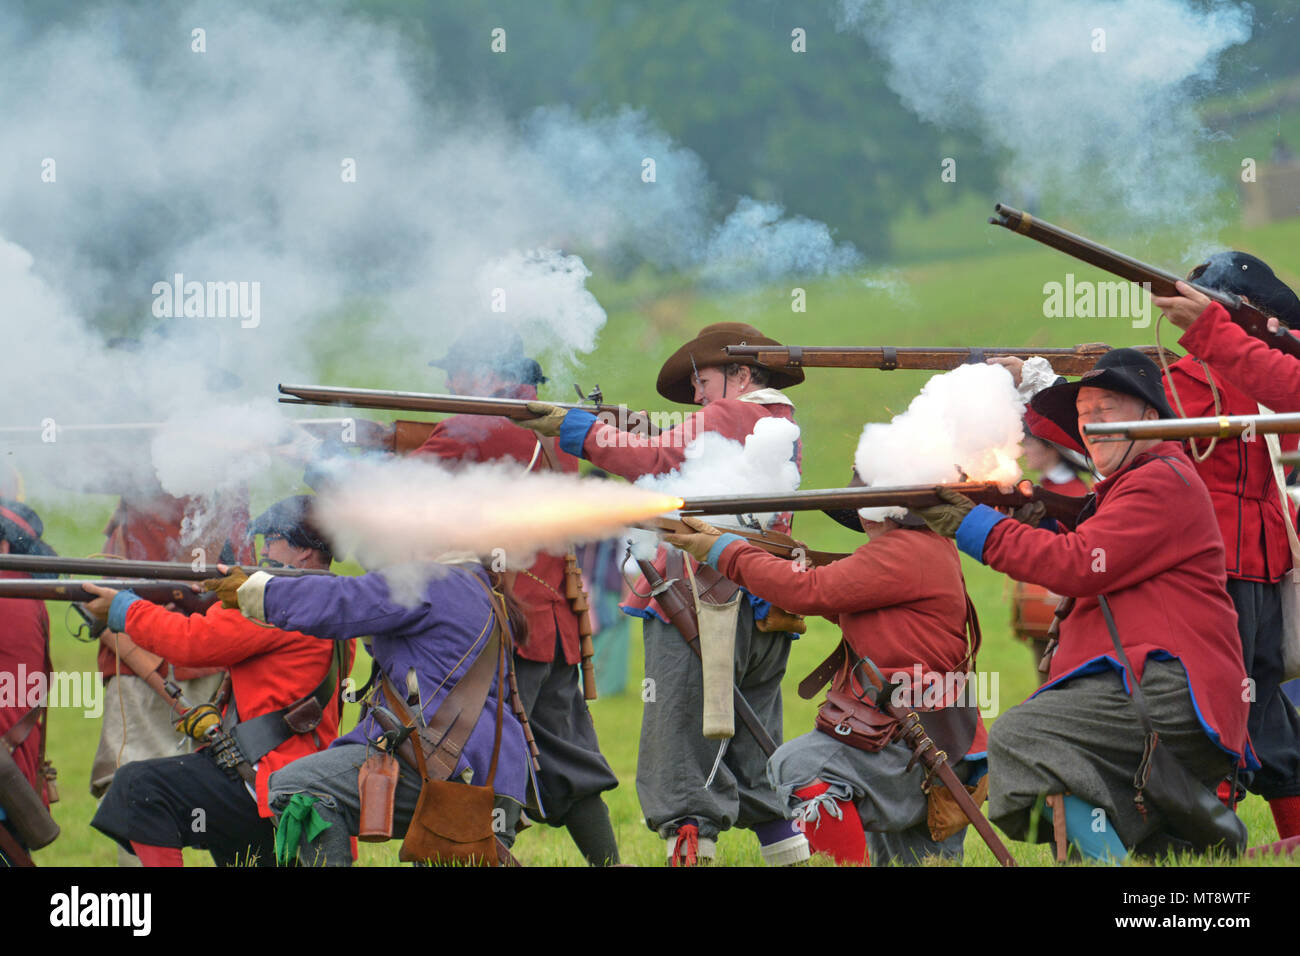 Ashton Court Estate, Bristol, UK. 28th May 2018 Bank Holiday Monday. Spectators take to Ashton Court Estate in Bristol to watch a Battlefield Re-Enactment between Parliamentarians v Royalists. Its the 375th Anniversary siege of Bristol,the 1st battle took place in 1643. Credit: Robert Timoney/Alamy Live News Stock Photo